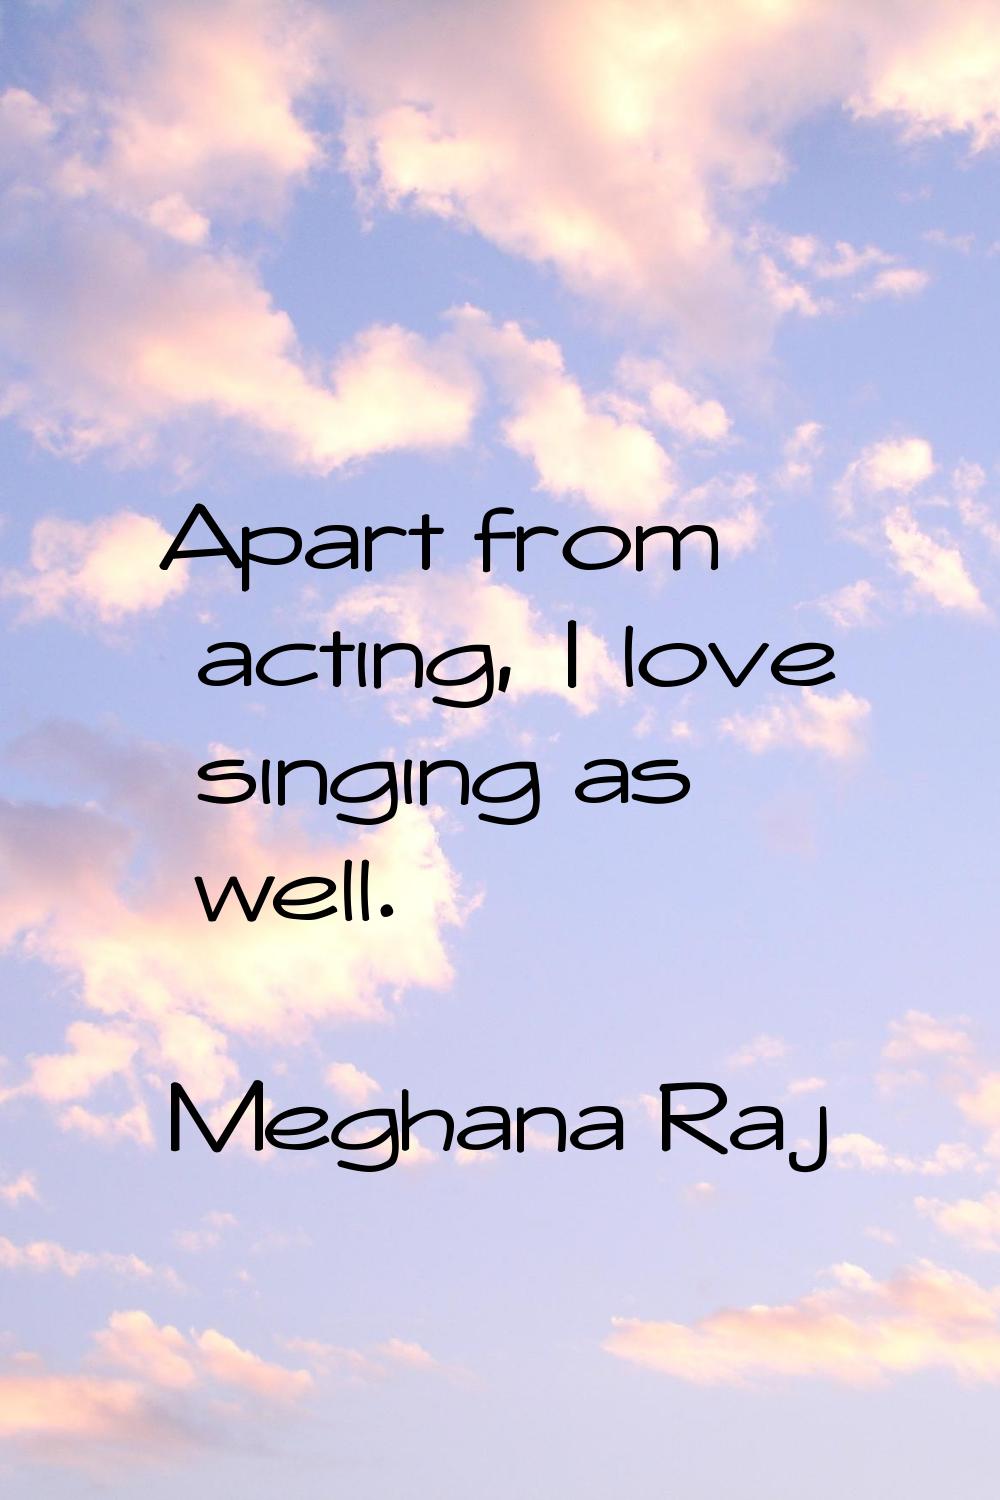 Apart from acting, I love singing as well.